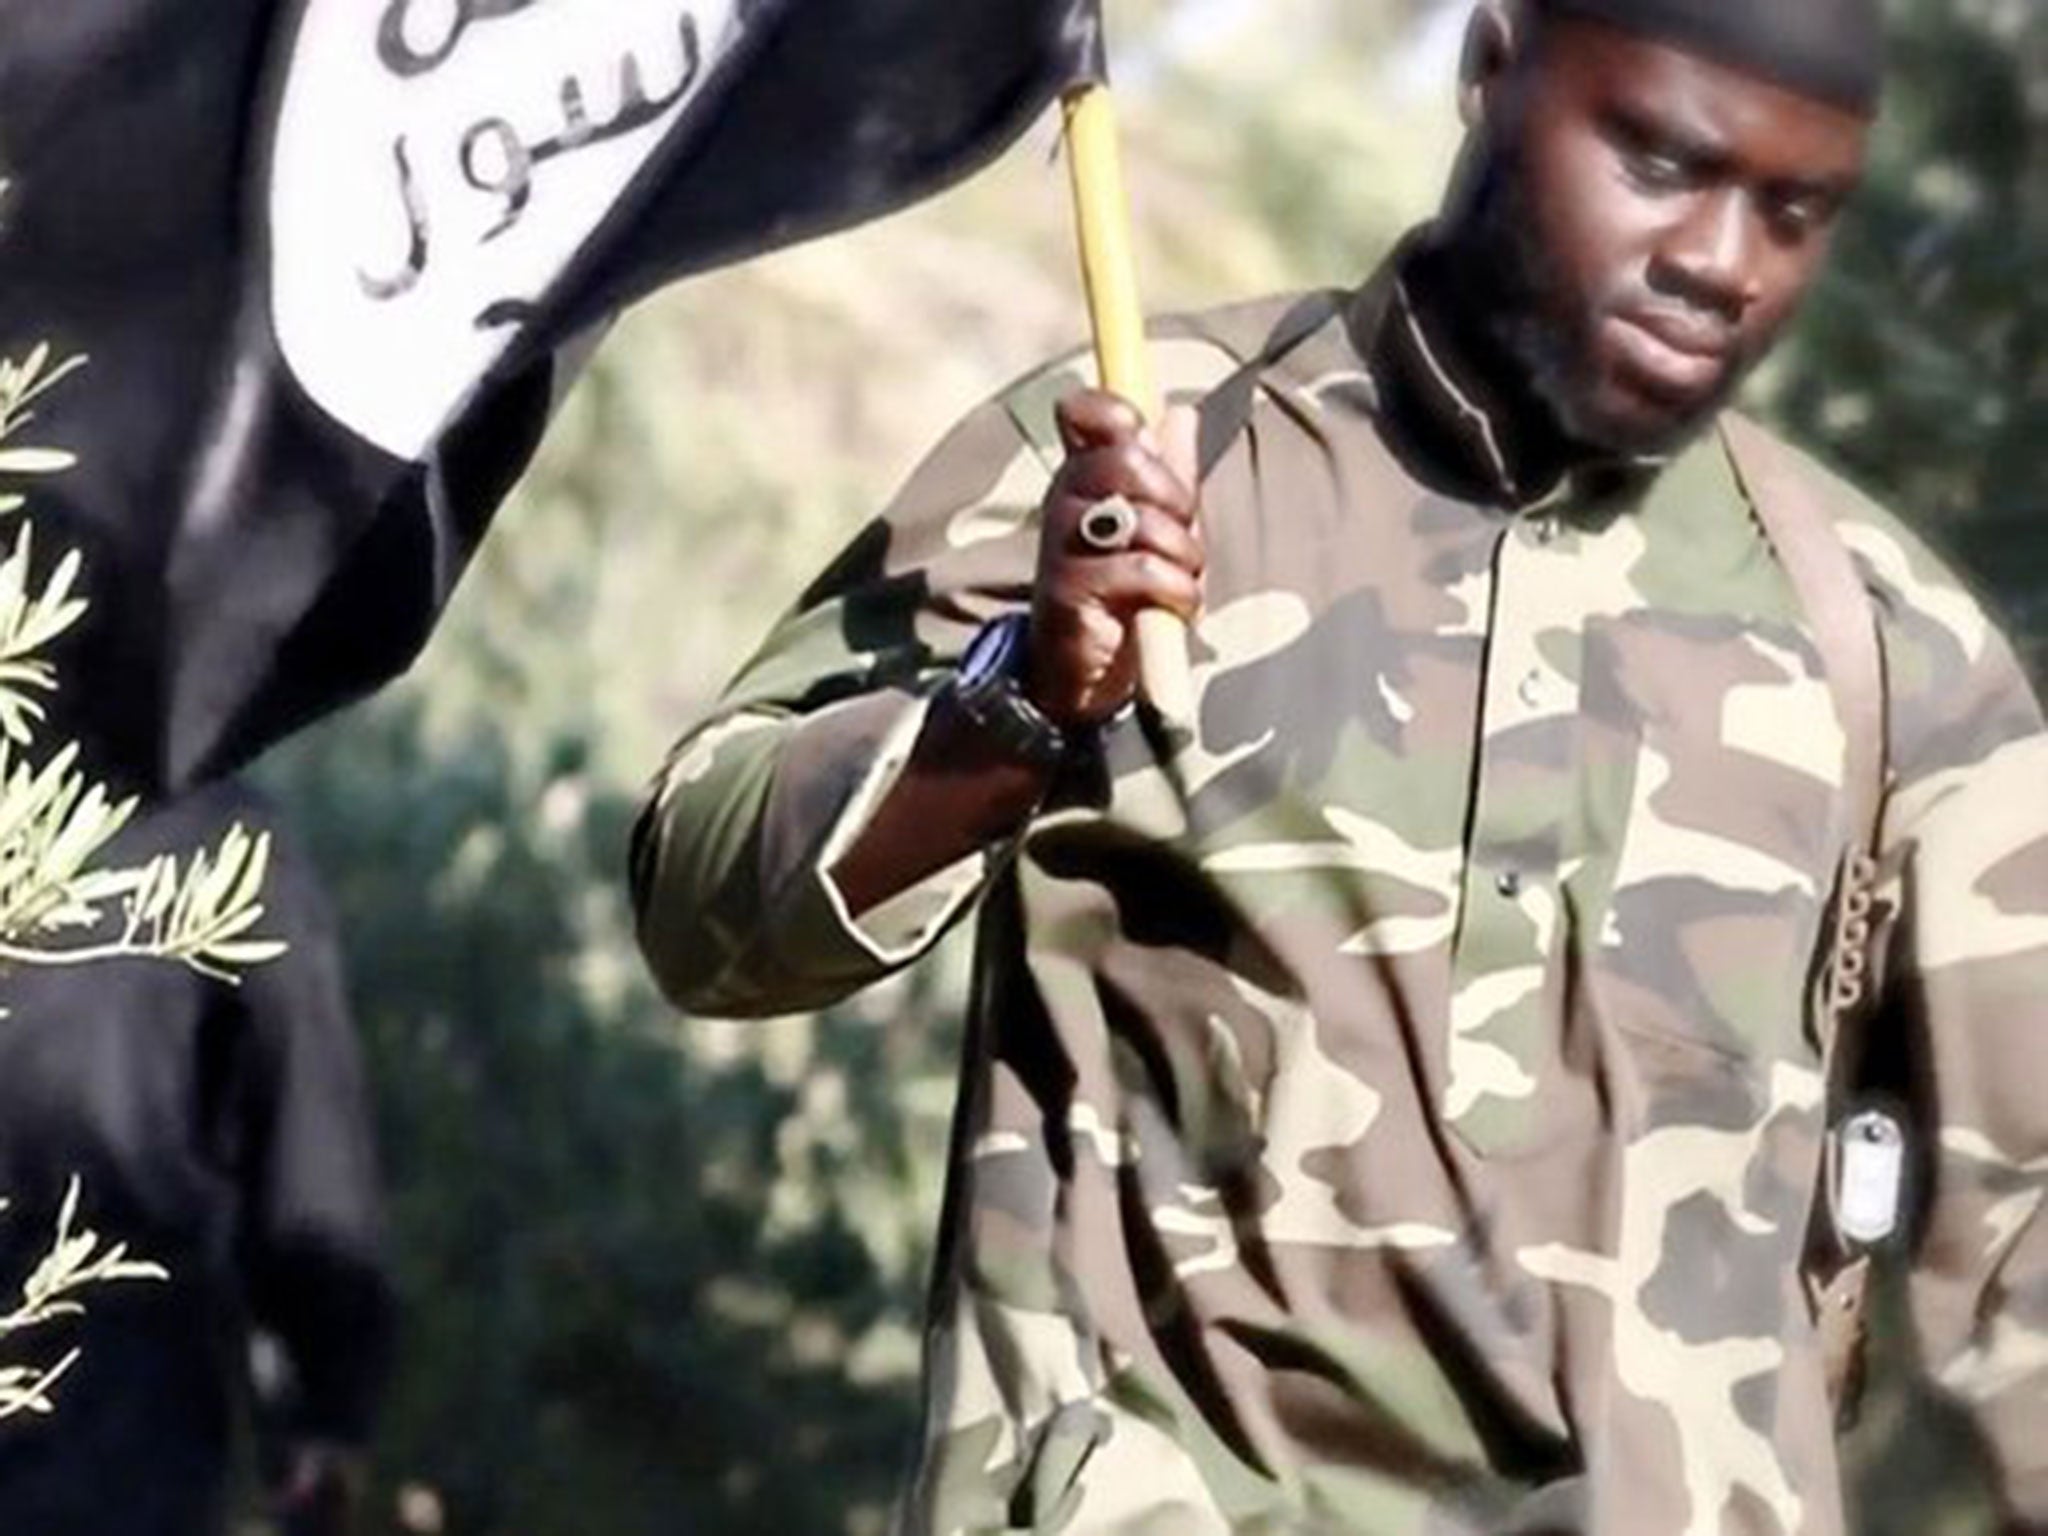 Harry Sarfo, who appeared in an Isis execution video, spoke to The Independent after fleeing the group